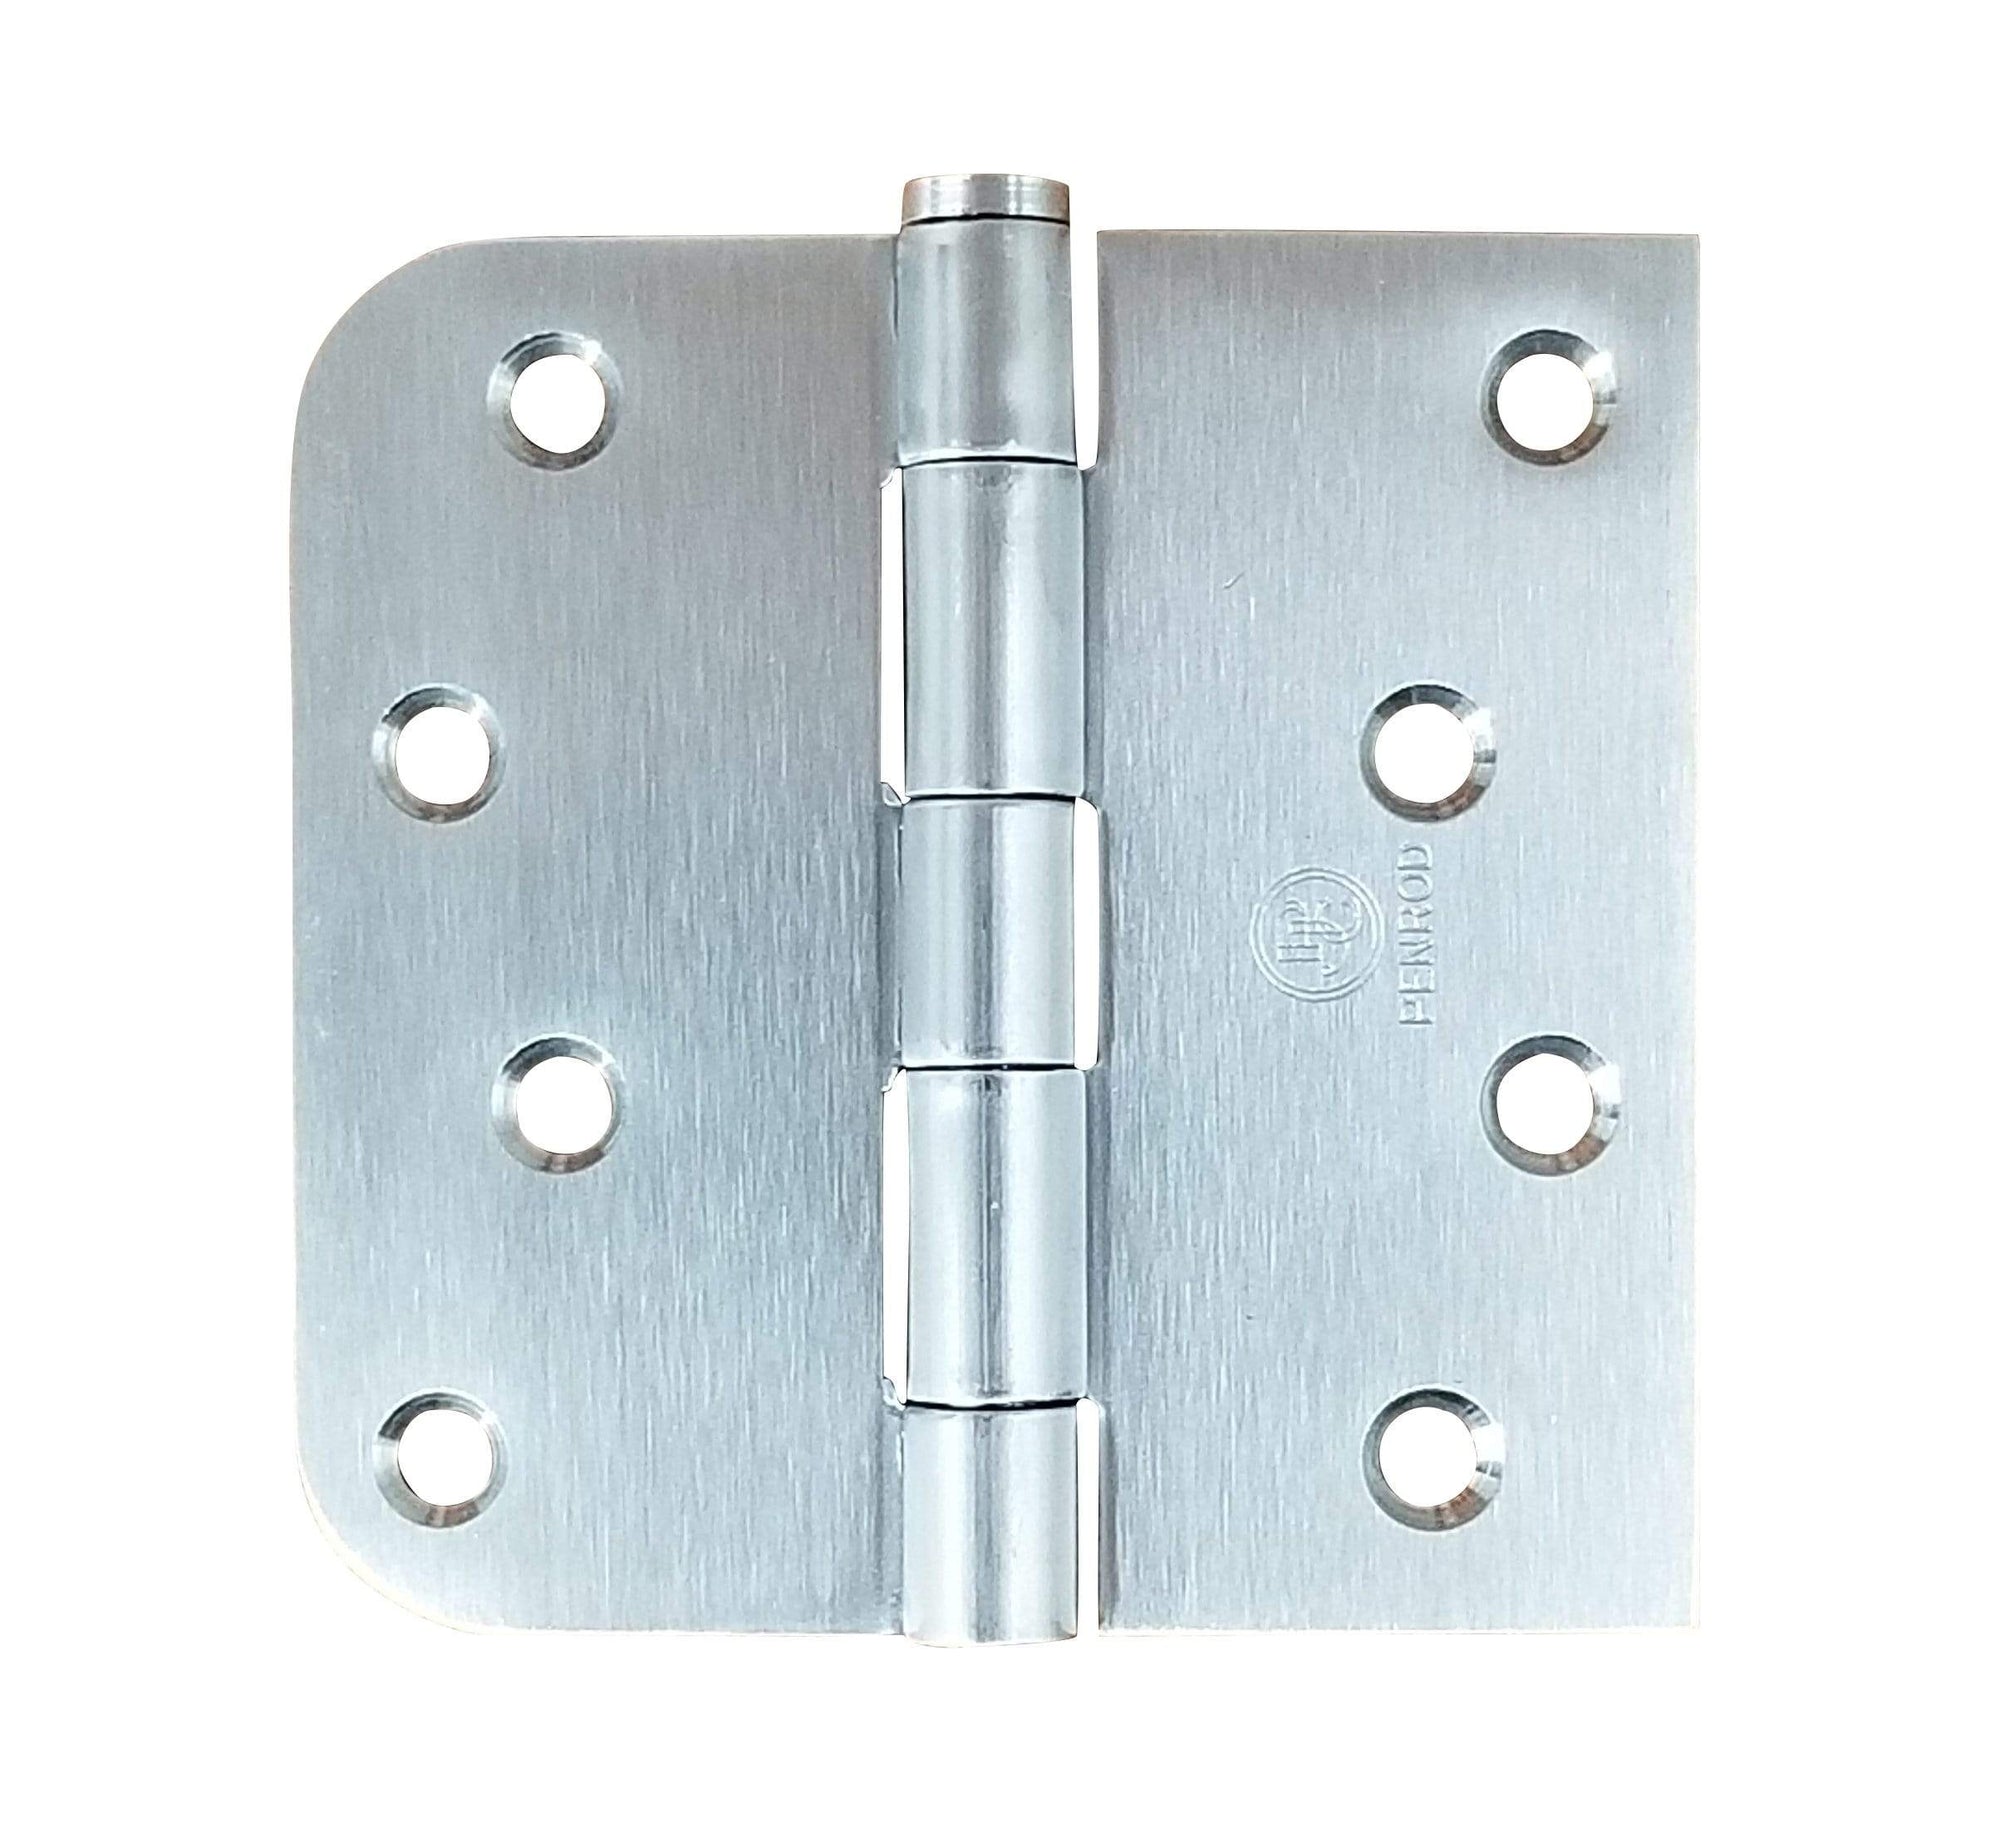 Stainless Steel Hinges 4" X 4" With 5/8" Square Corners - Reversible With Removable Pins - Highly Rust Resistant - 2 Pack